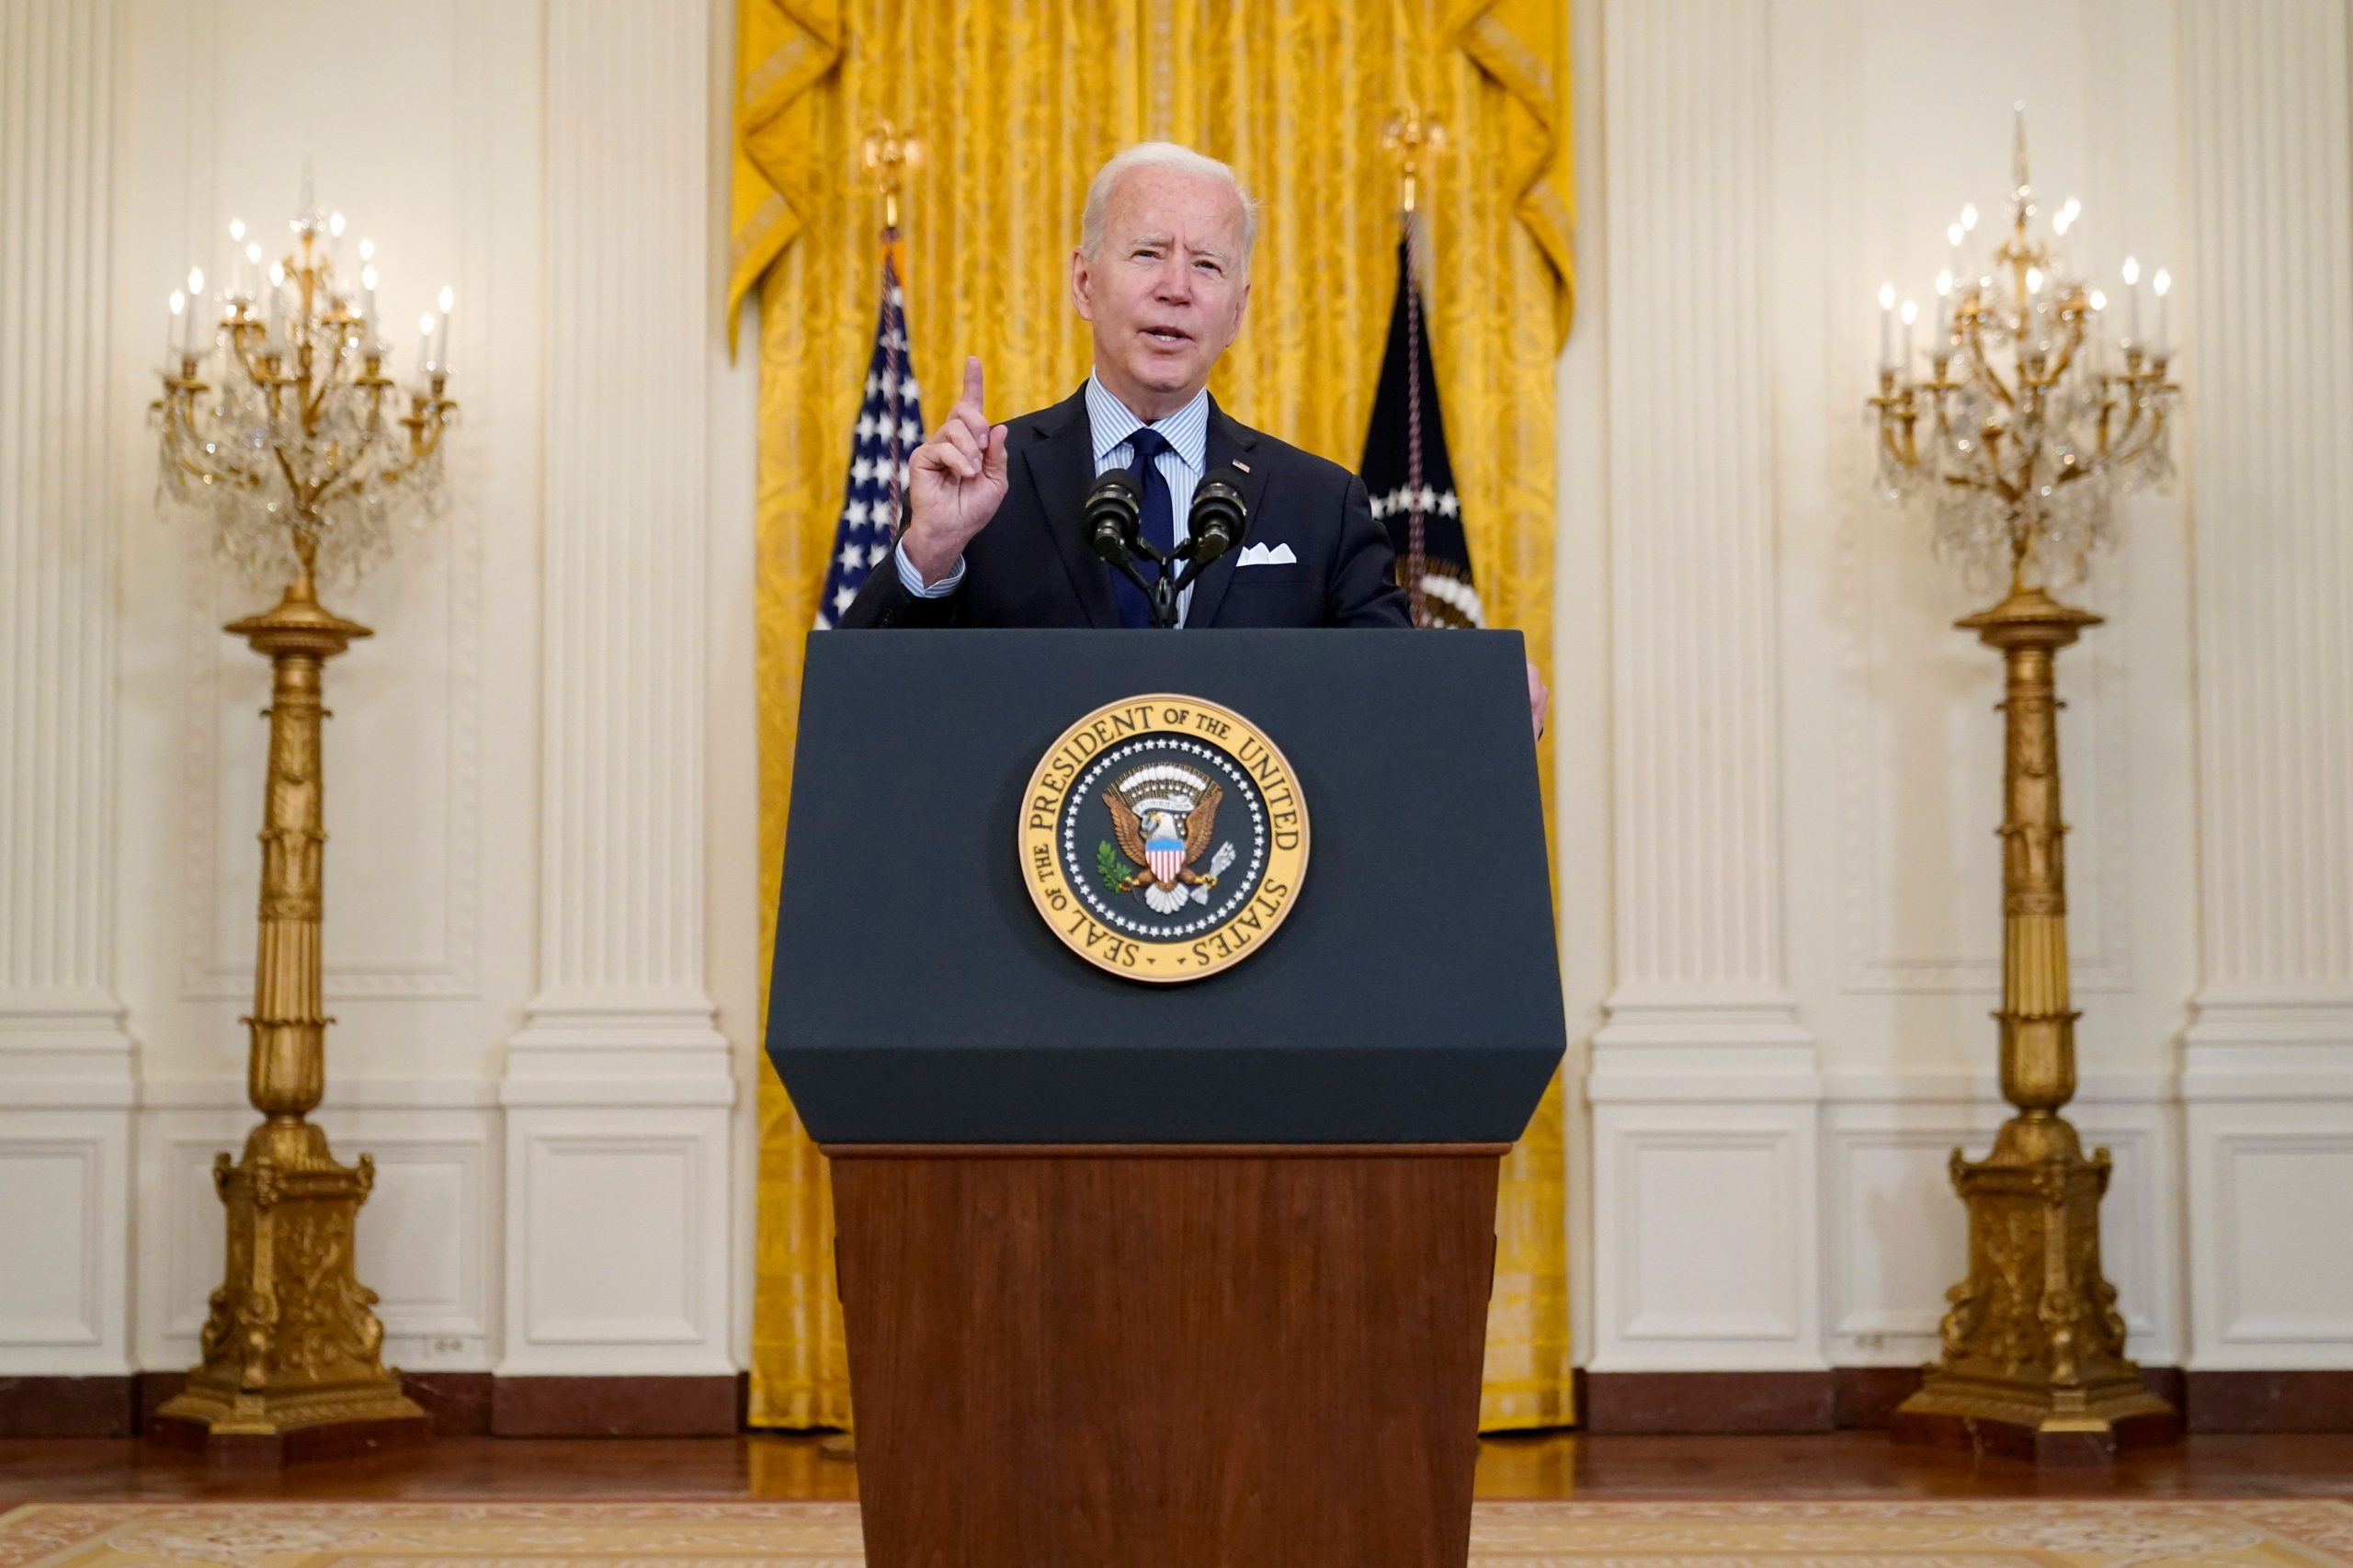 ‘Going to try’, says Joe Biden as world leaders turn to US for vaccine assistance